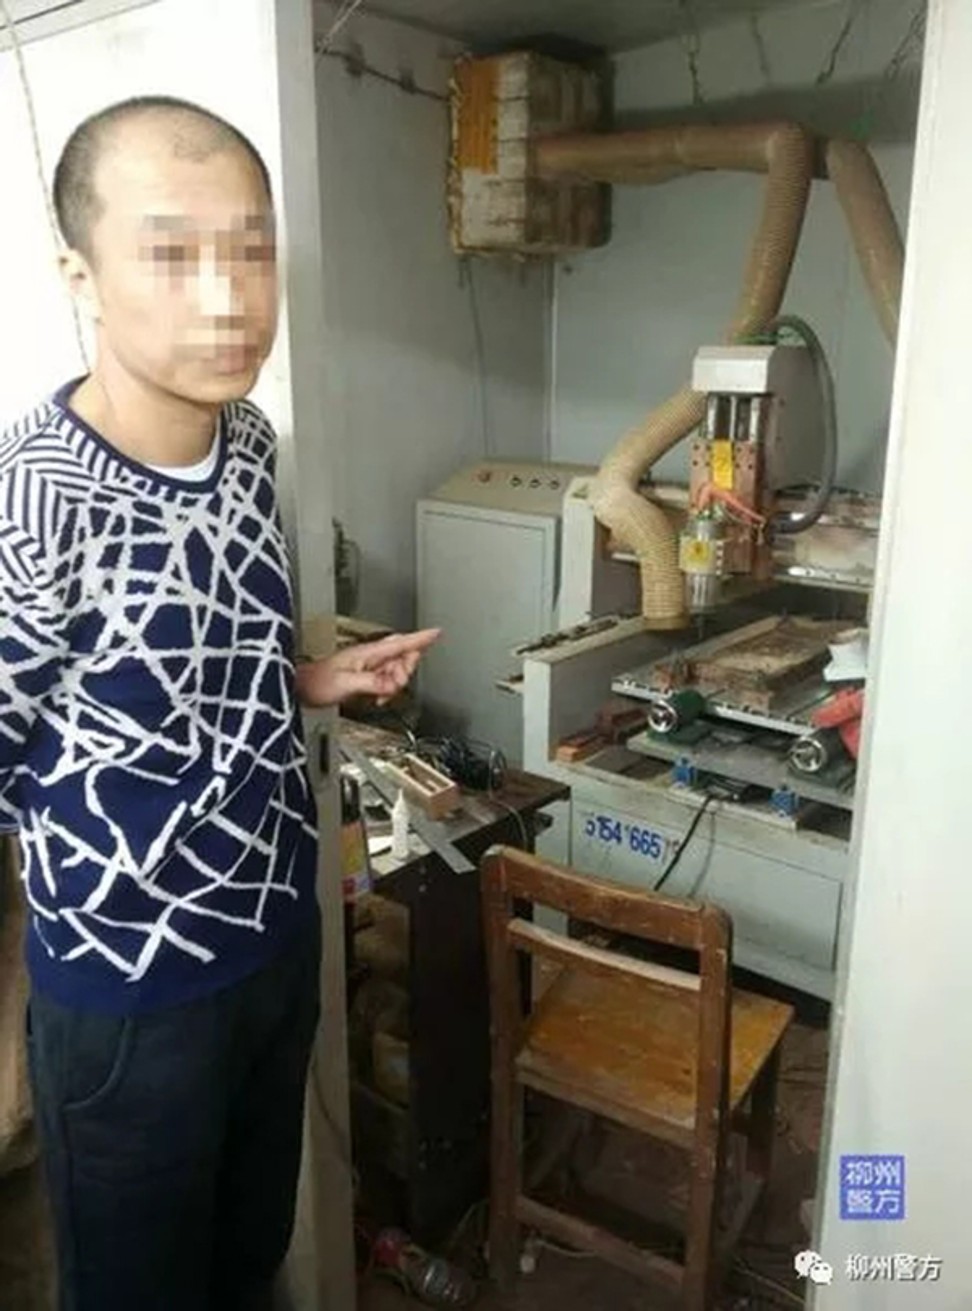 A suspect stands next to a piece of machinery that is believed to have been used to manufacture gun parts. Photo: Thepaper.cn